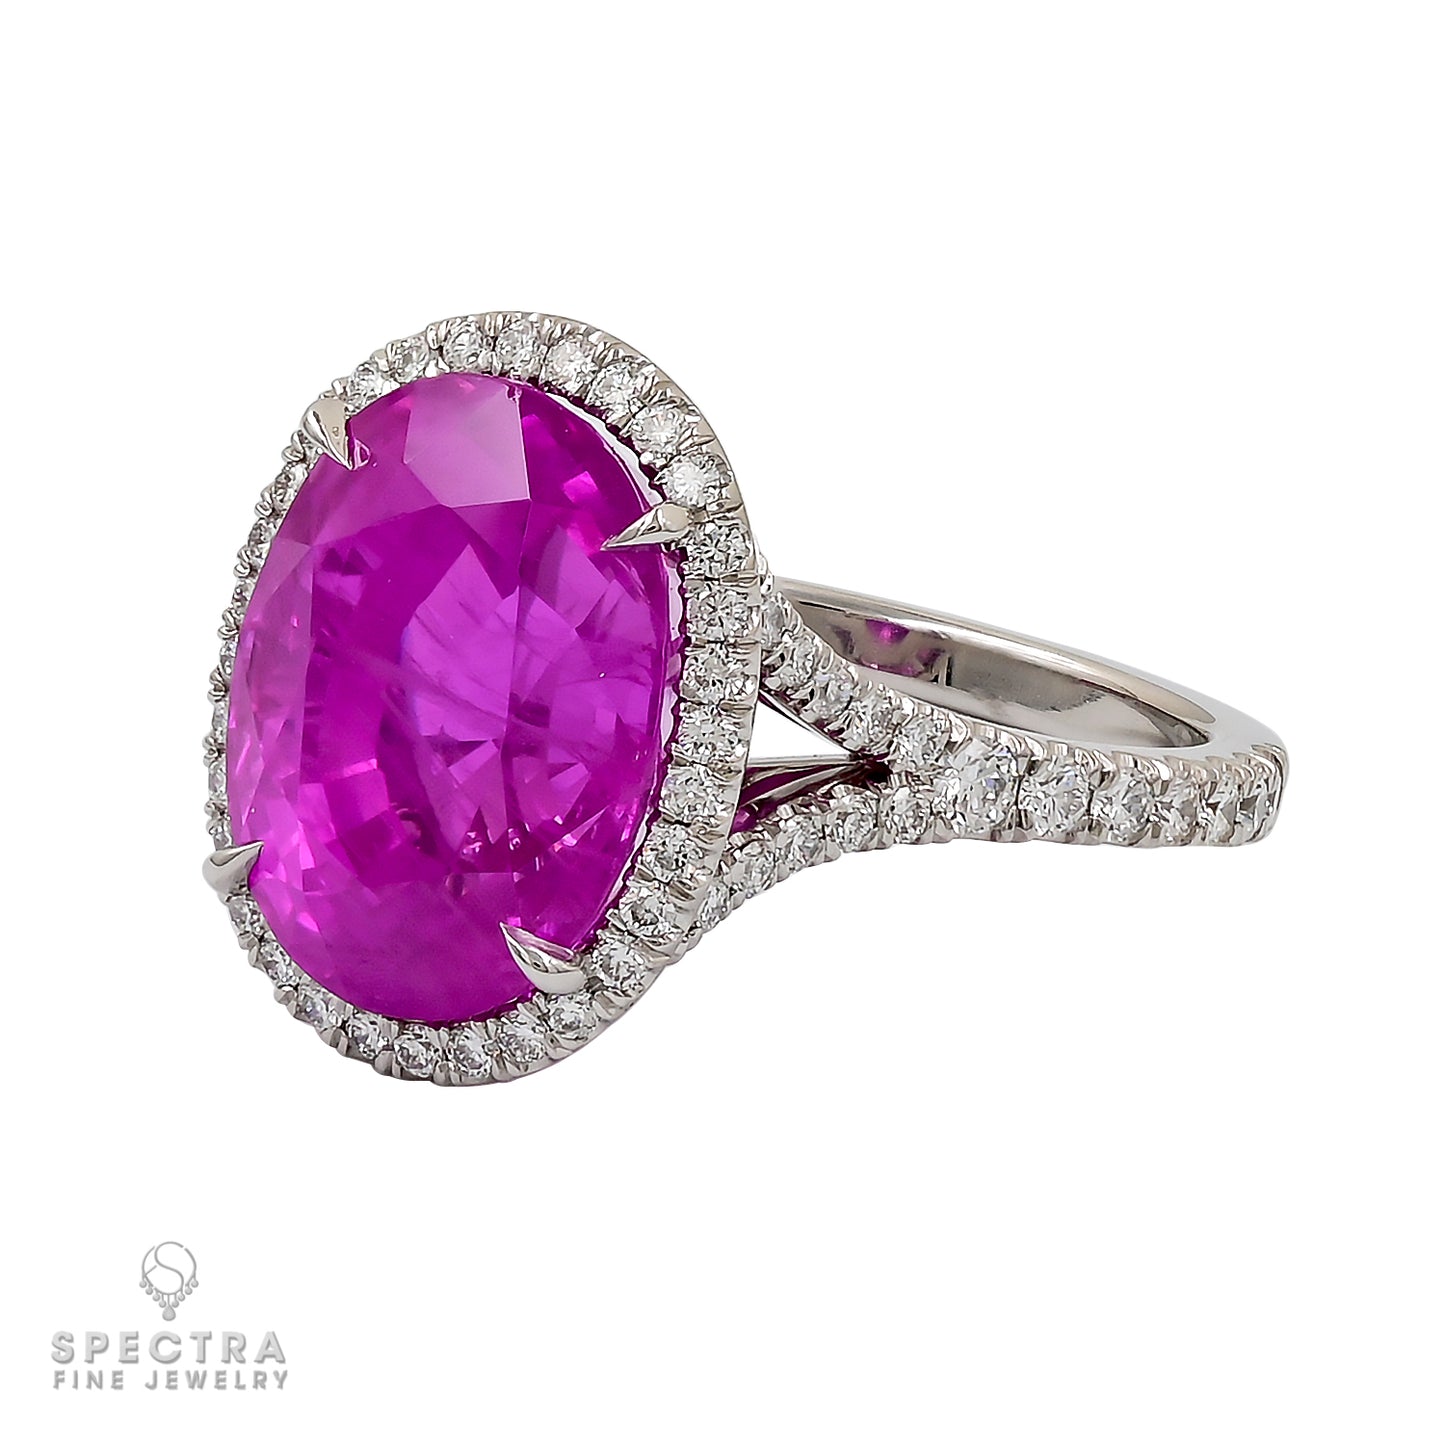 Spectra Fine Jewelry Platinum Certified 10.06ct Pink Sapphire Ring